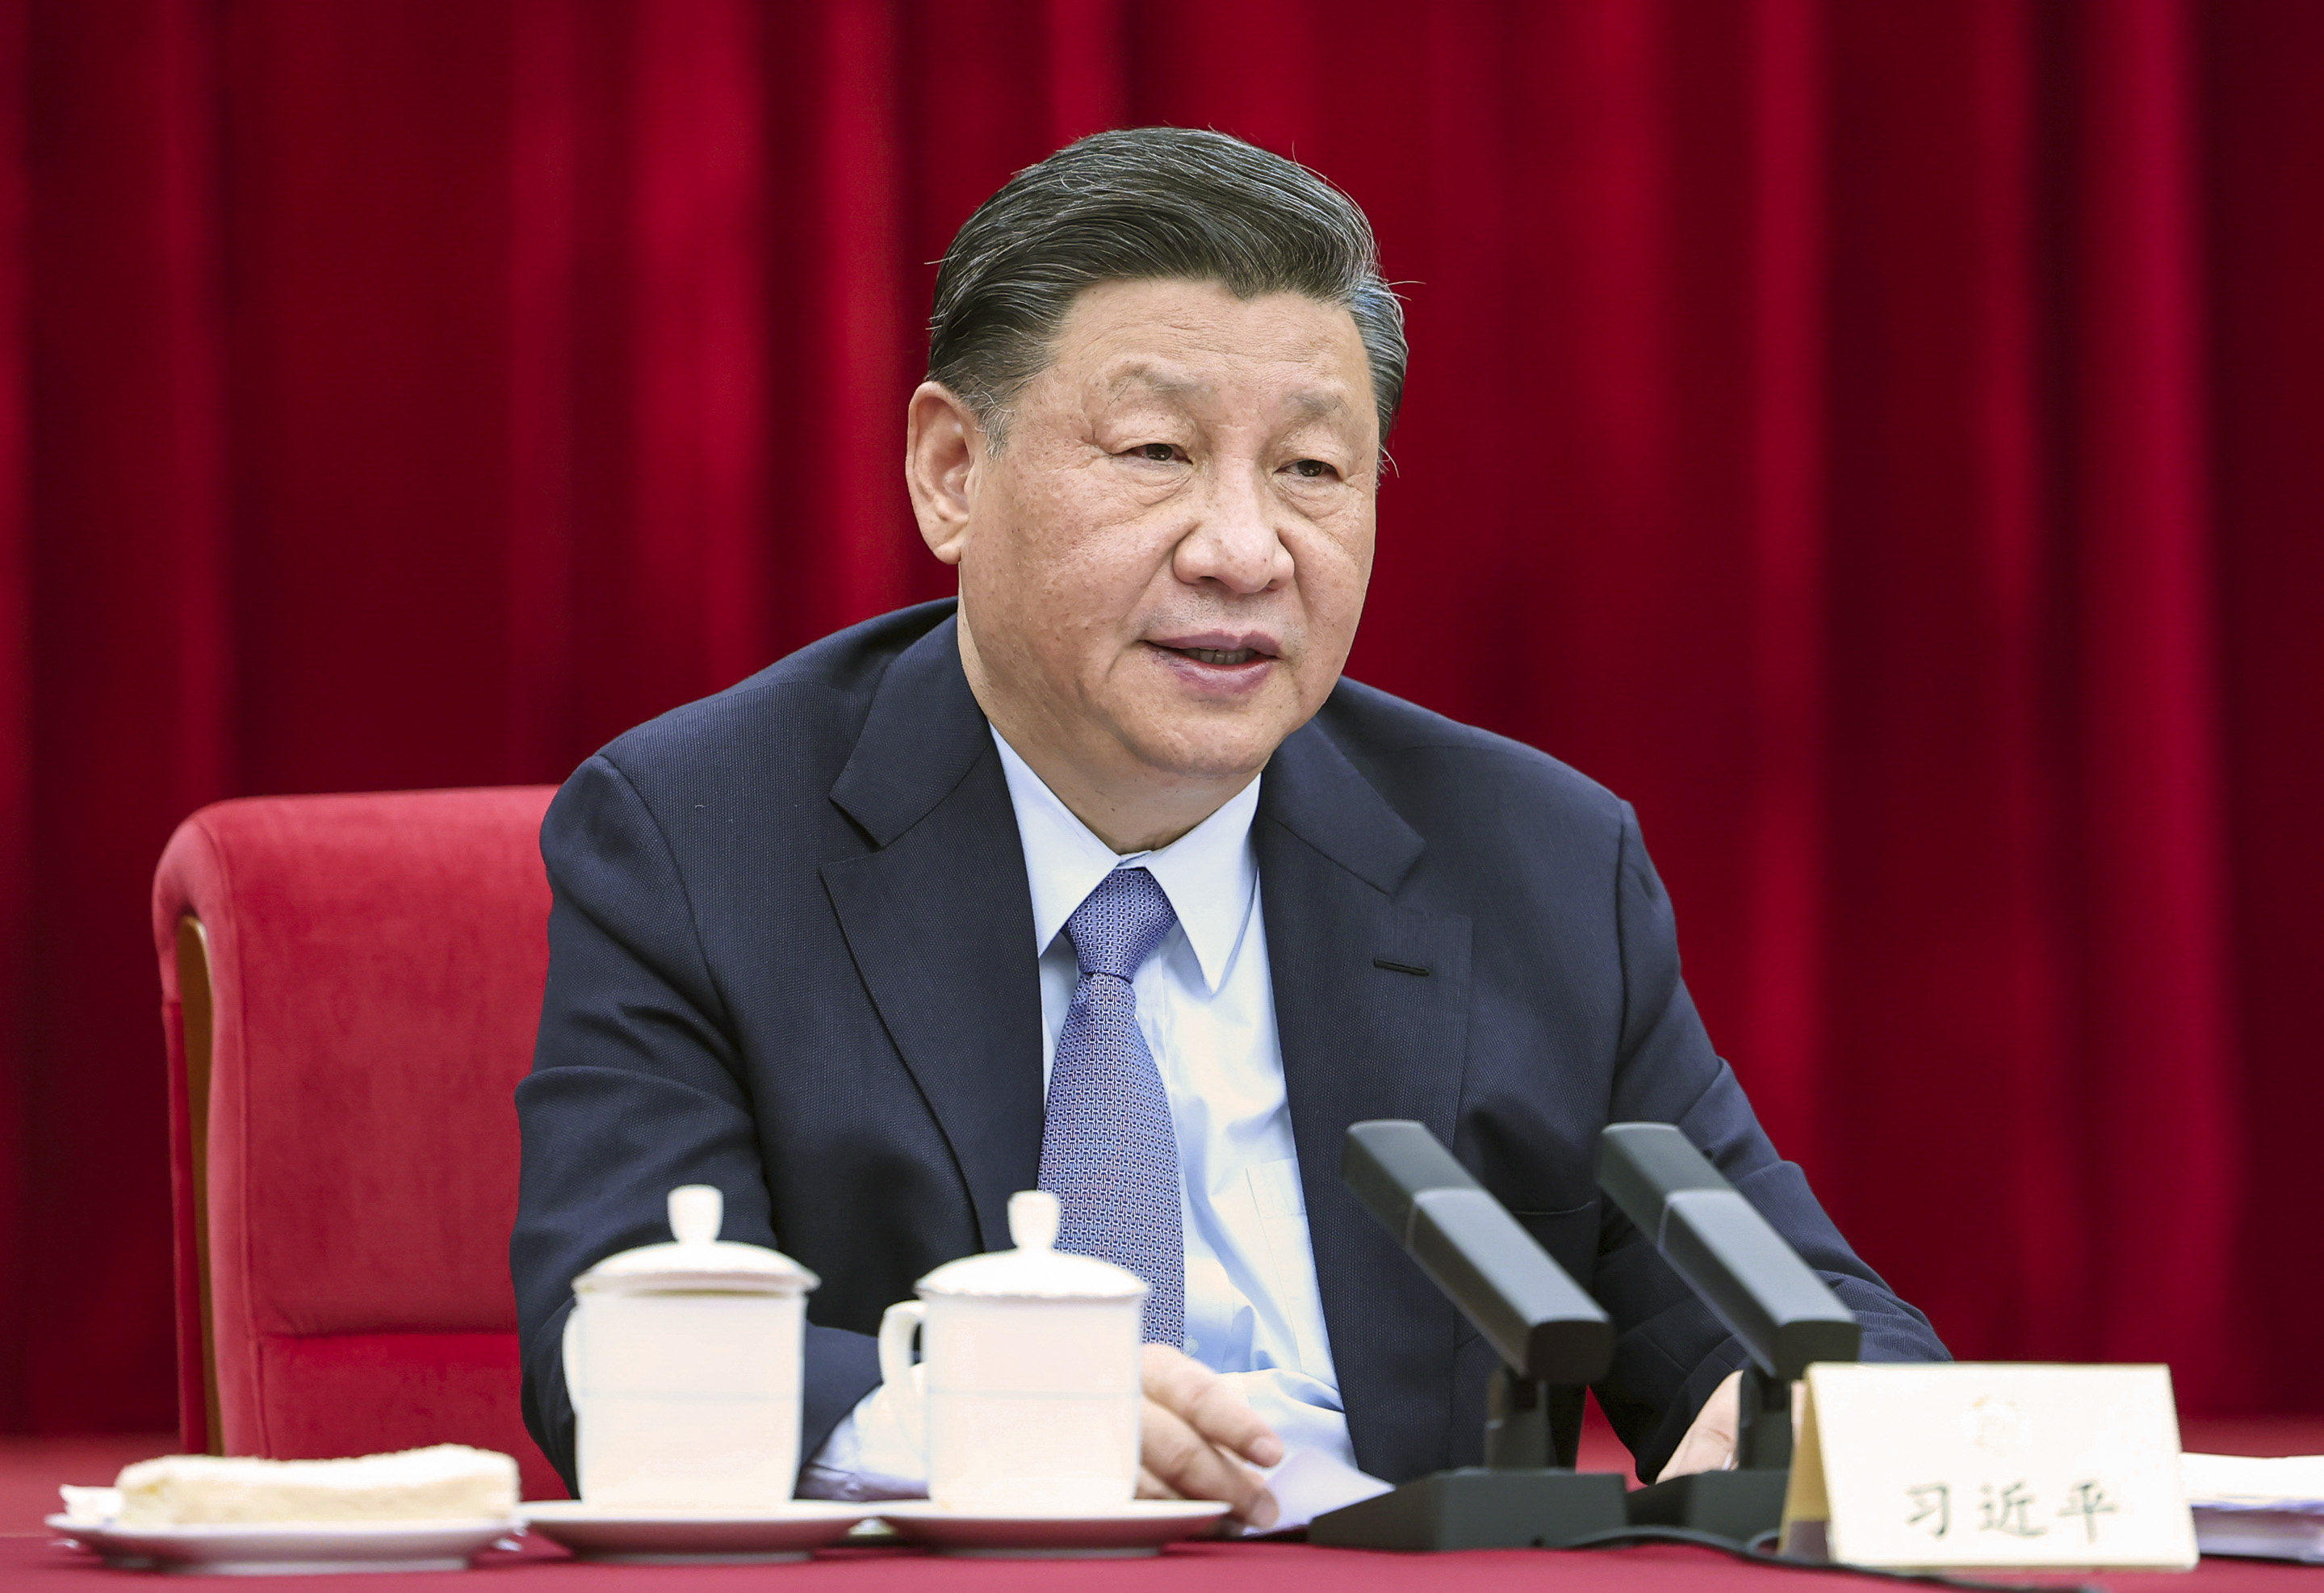 President Xi Jinping told the nation’s top political advisory body, “We have always treated private firms and entrepreneurs as one of us.” Photo: Xinhua